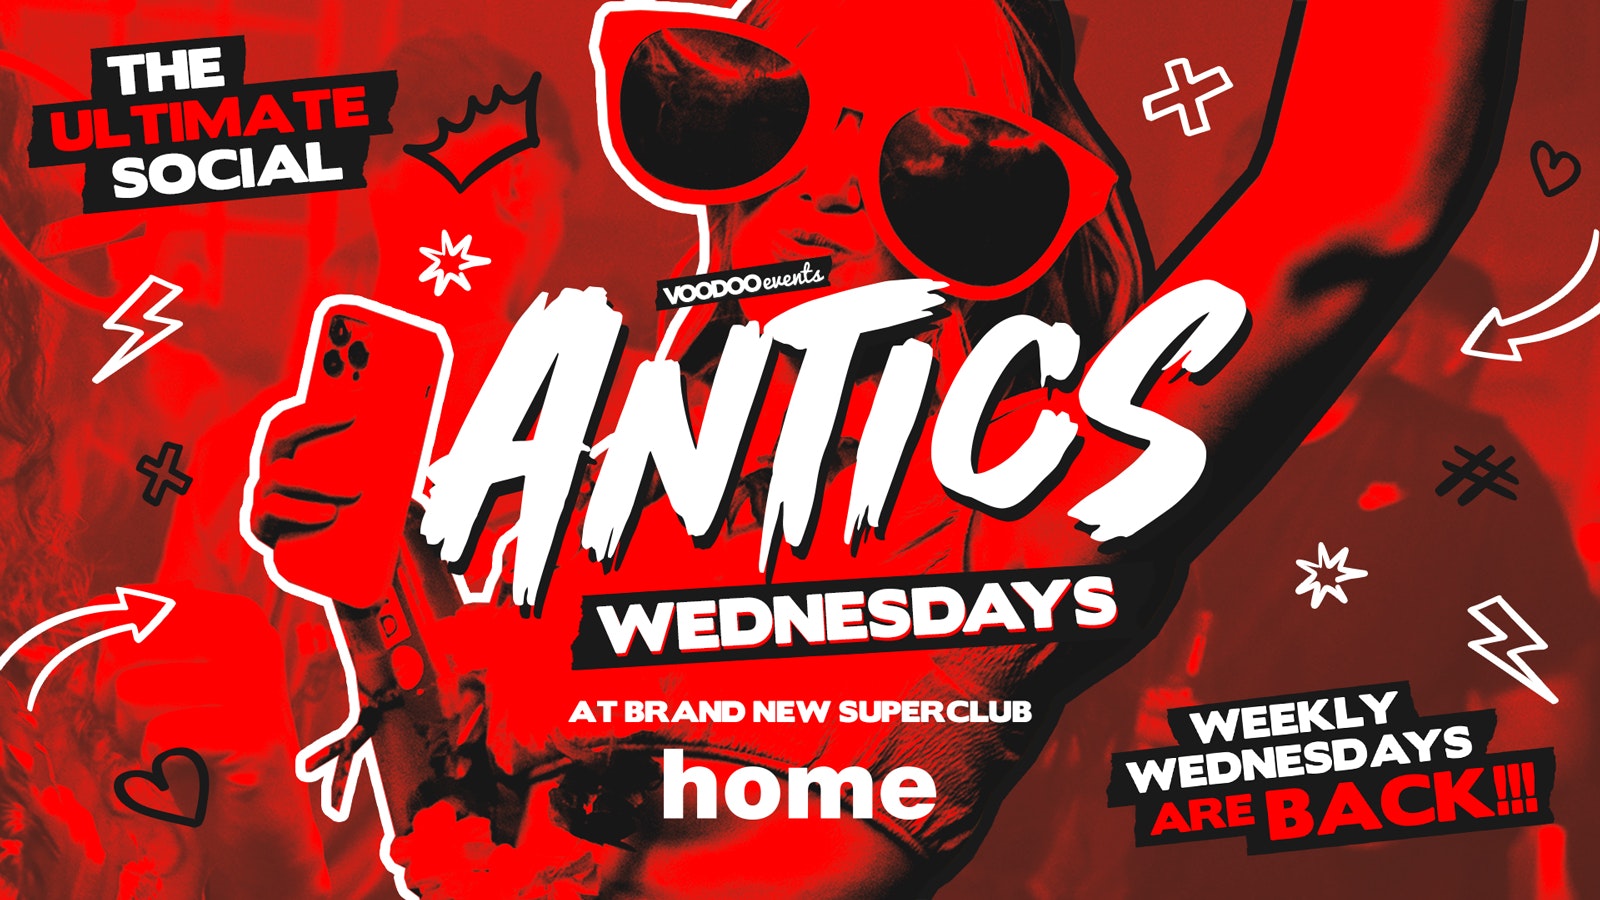 Antics @ THE BRAND NEW SUPER CLUB HOME – Wednesday 16th May